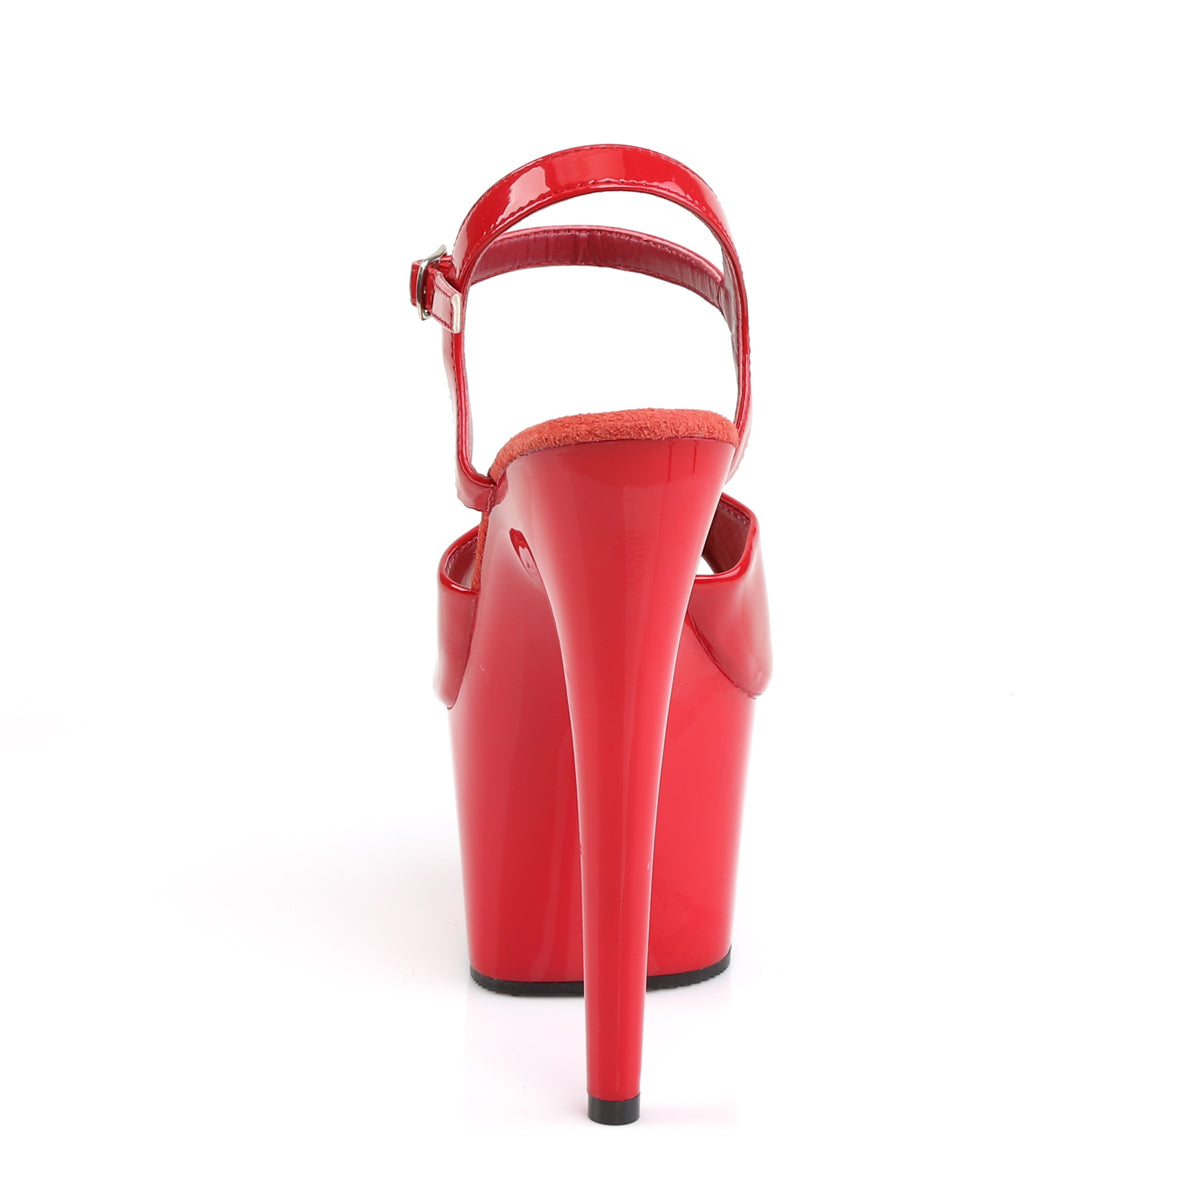 ADORE-709 Pleasers 7 Inch Heel Red Pole Dancing Platforms-Pleaser- Sexy Shoes Fetish Footwear